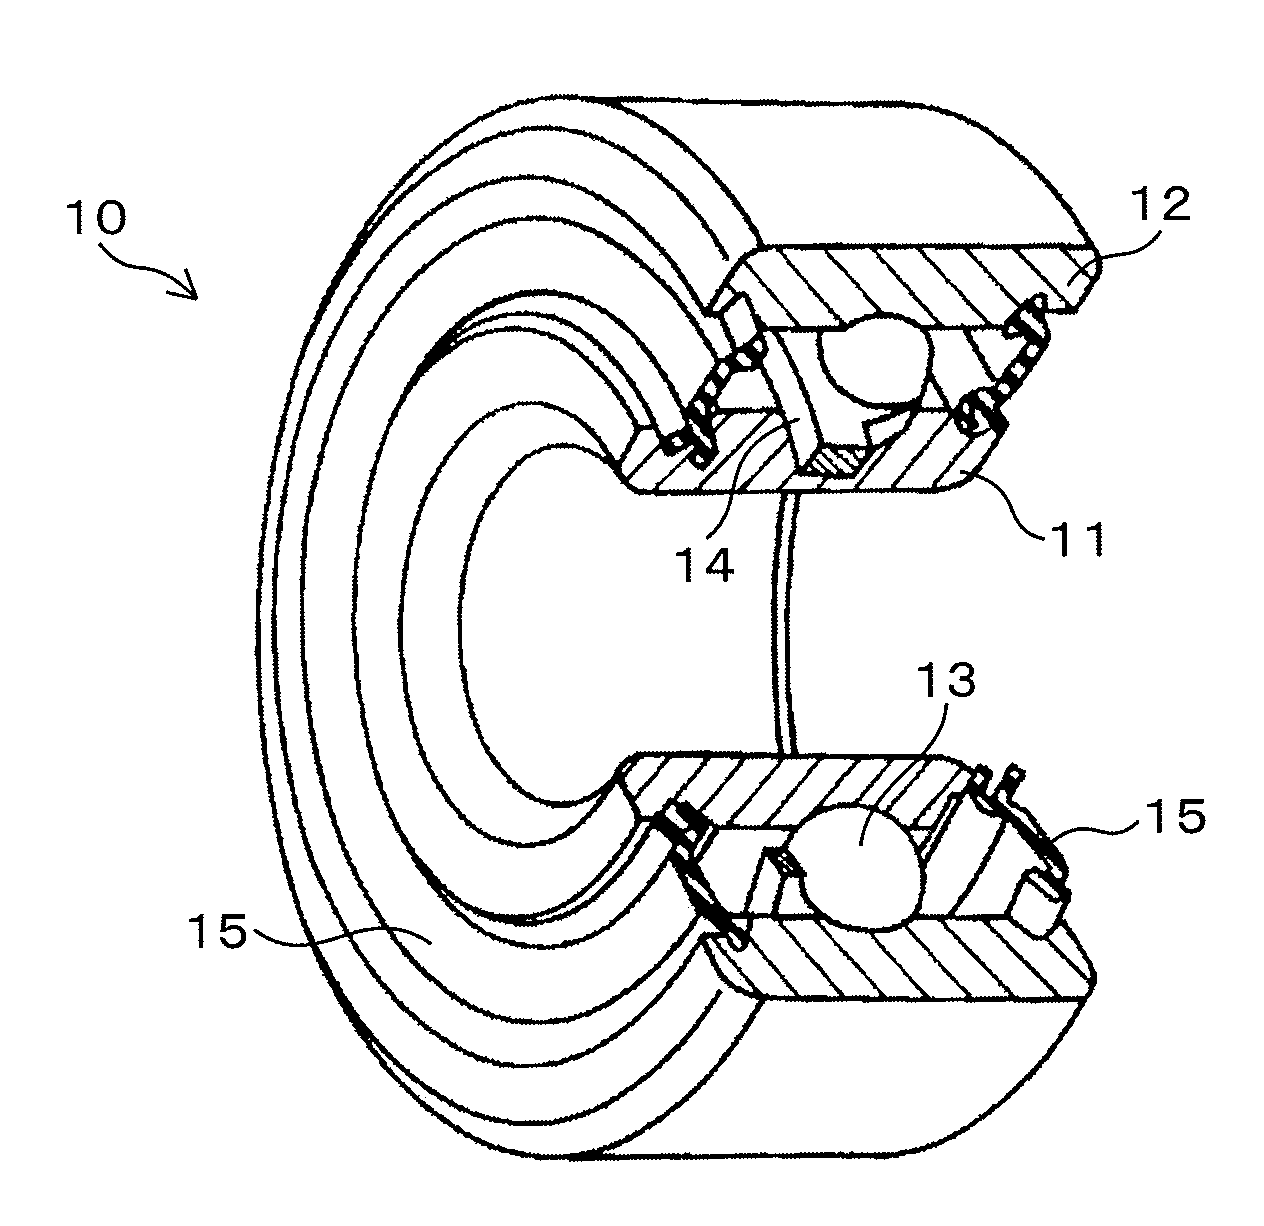 Martensitic stainless steel and antifriction bearing using the same